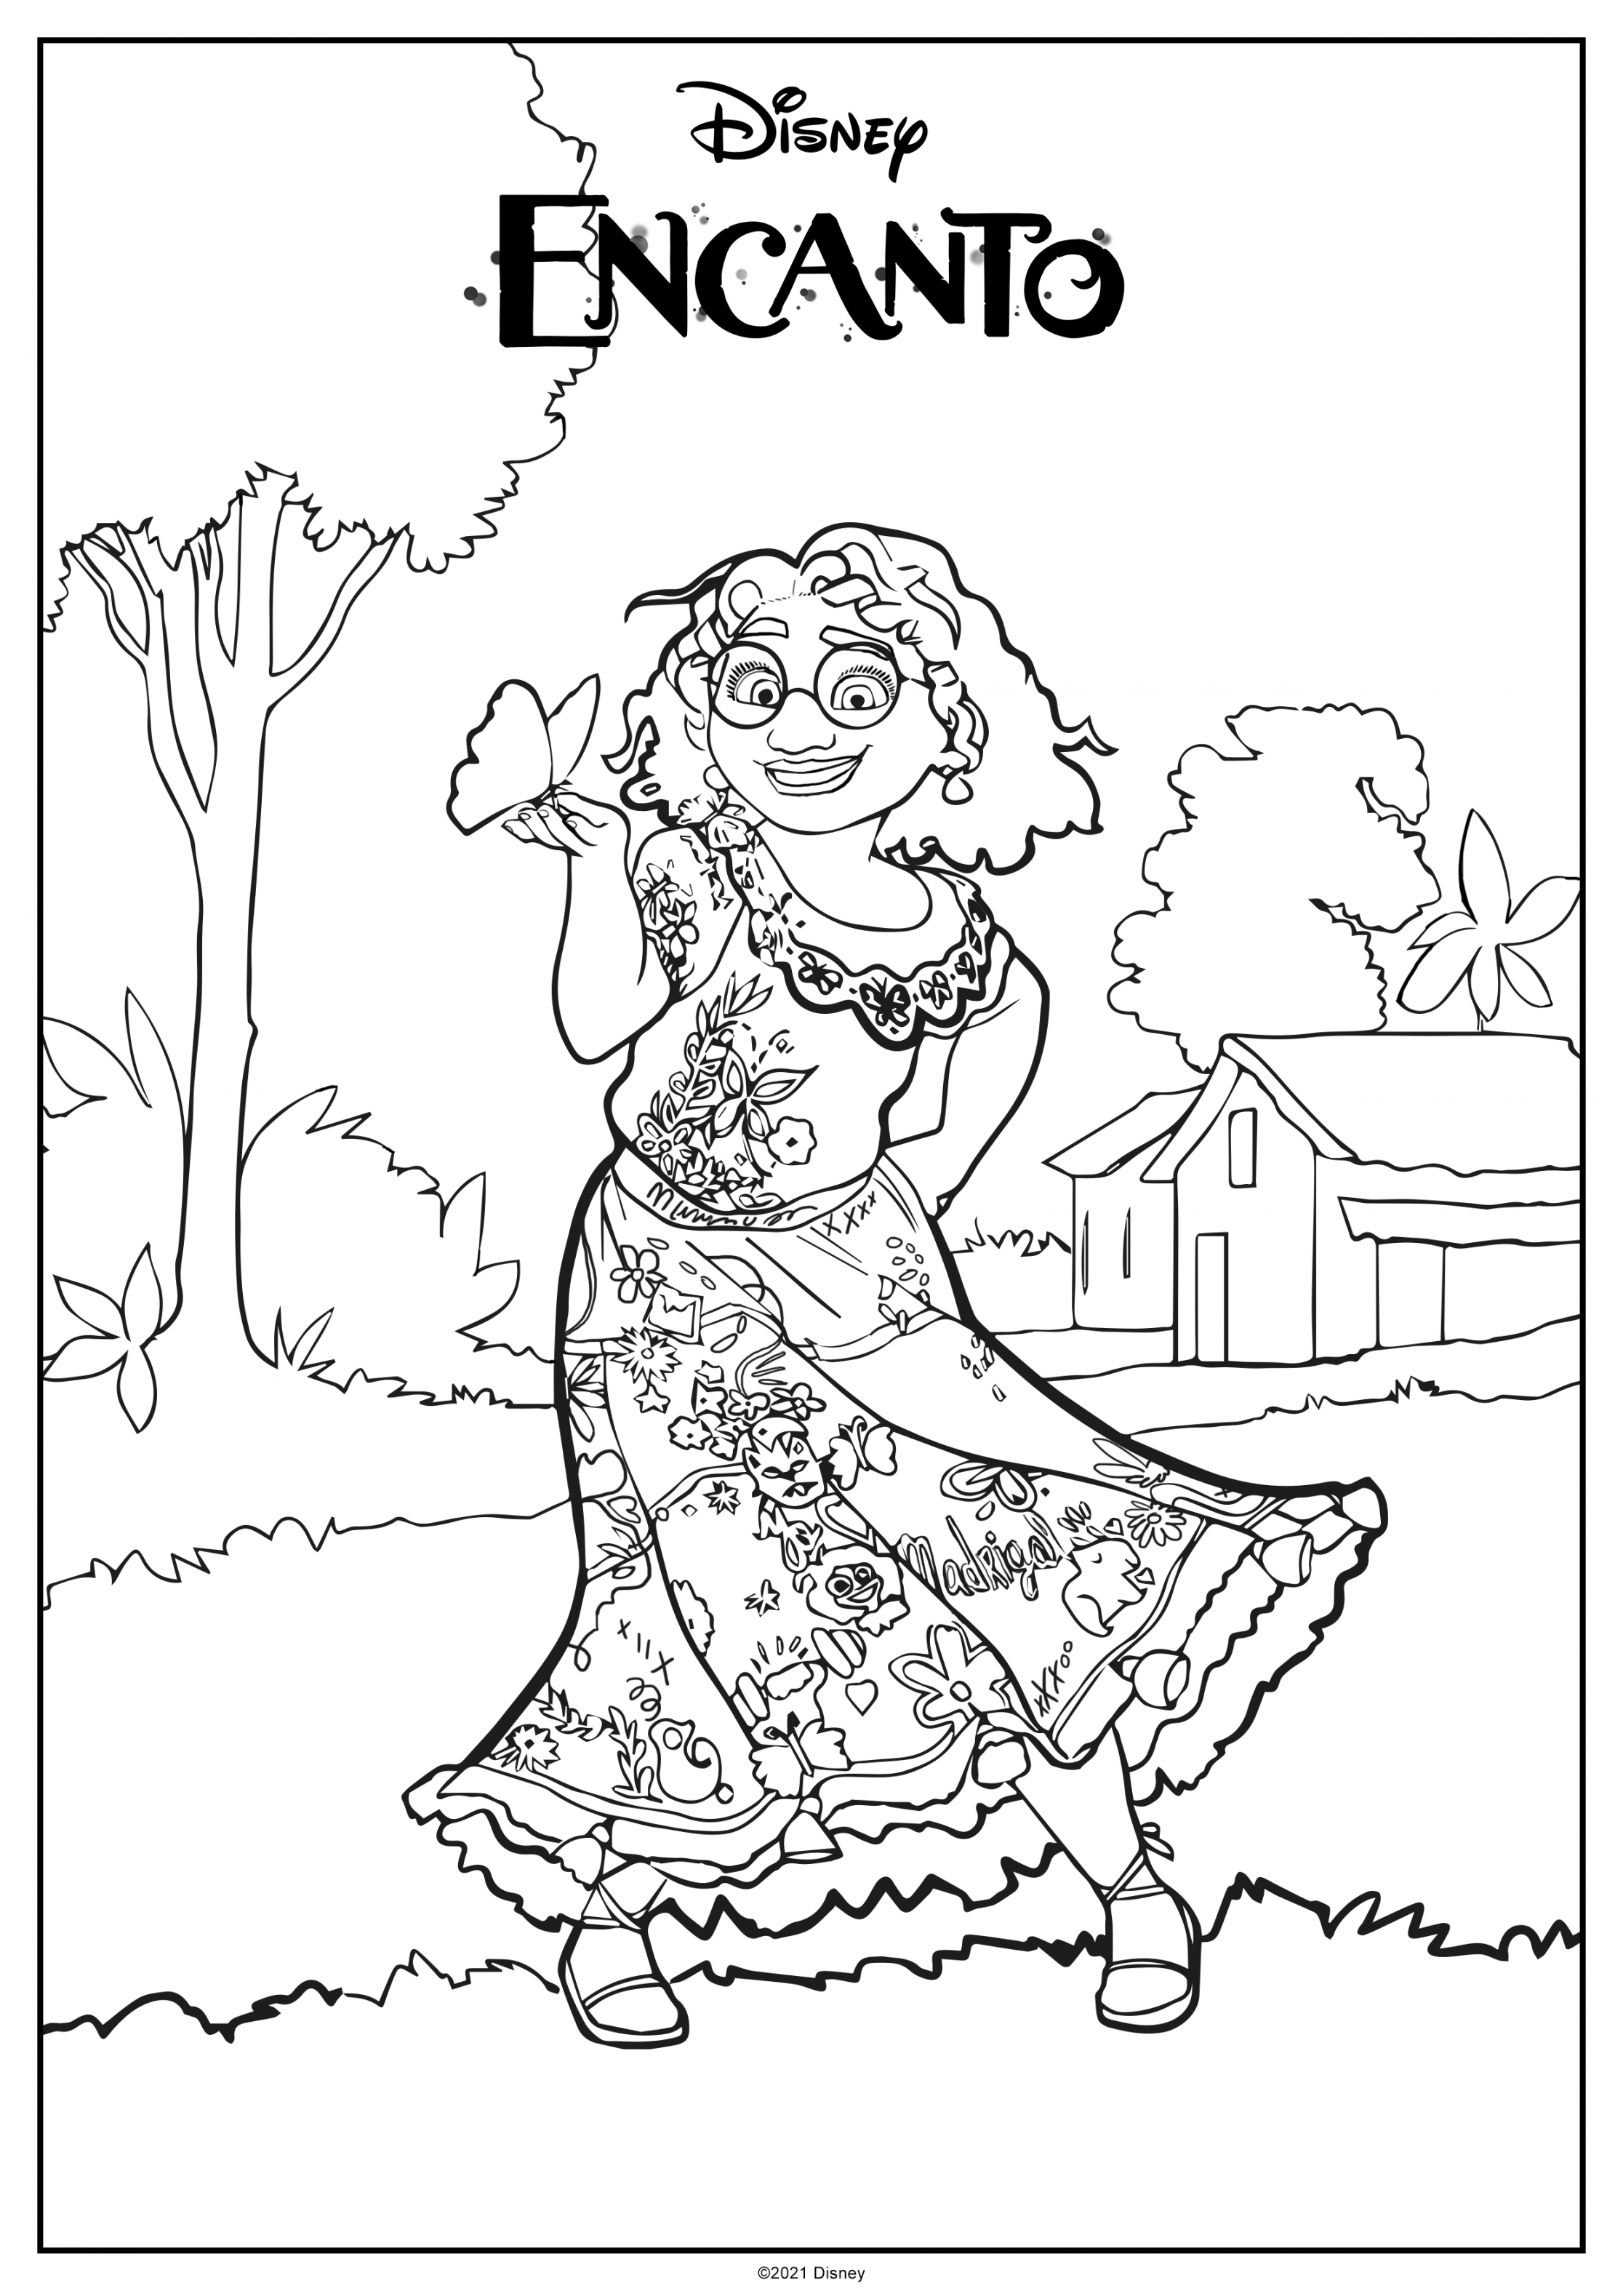 Encanto Coloring Pages and Activity Pack Simply Sweet Days - FREE Printables - Encanto Coloring Pages Free Printable